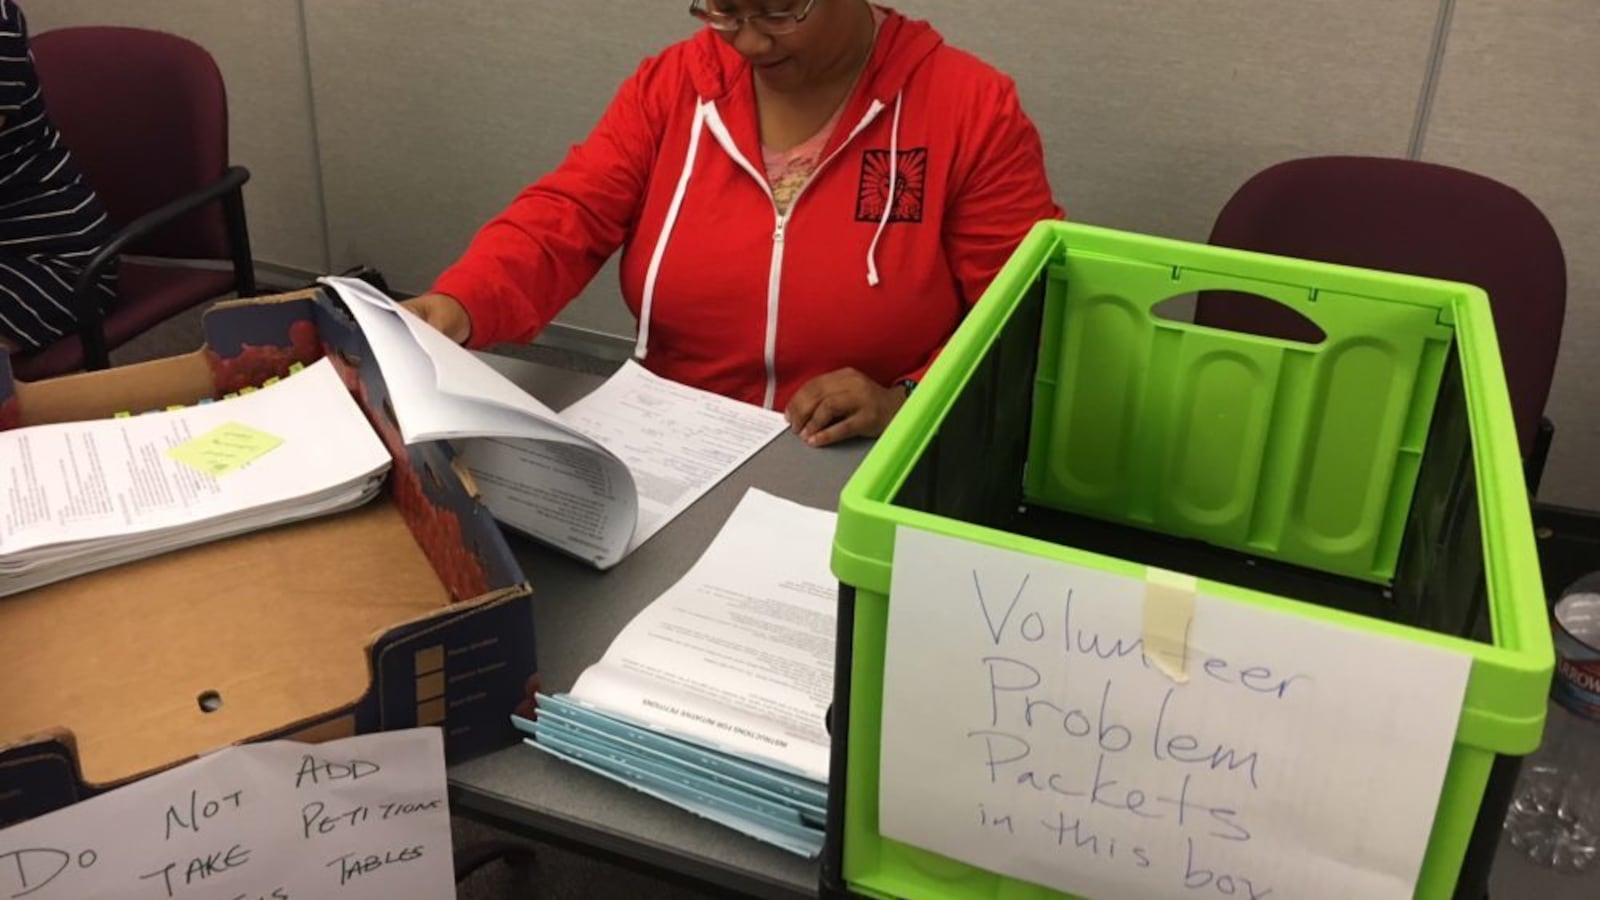 Joi Lin, a Boulder Valley Education Association employee, checks notary pages on petitions for Great Schools, Thriving communities. (Erica Meltzer/Chalkbeat)